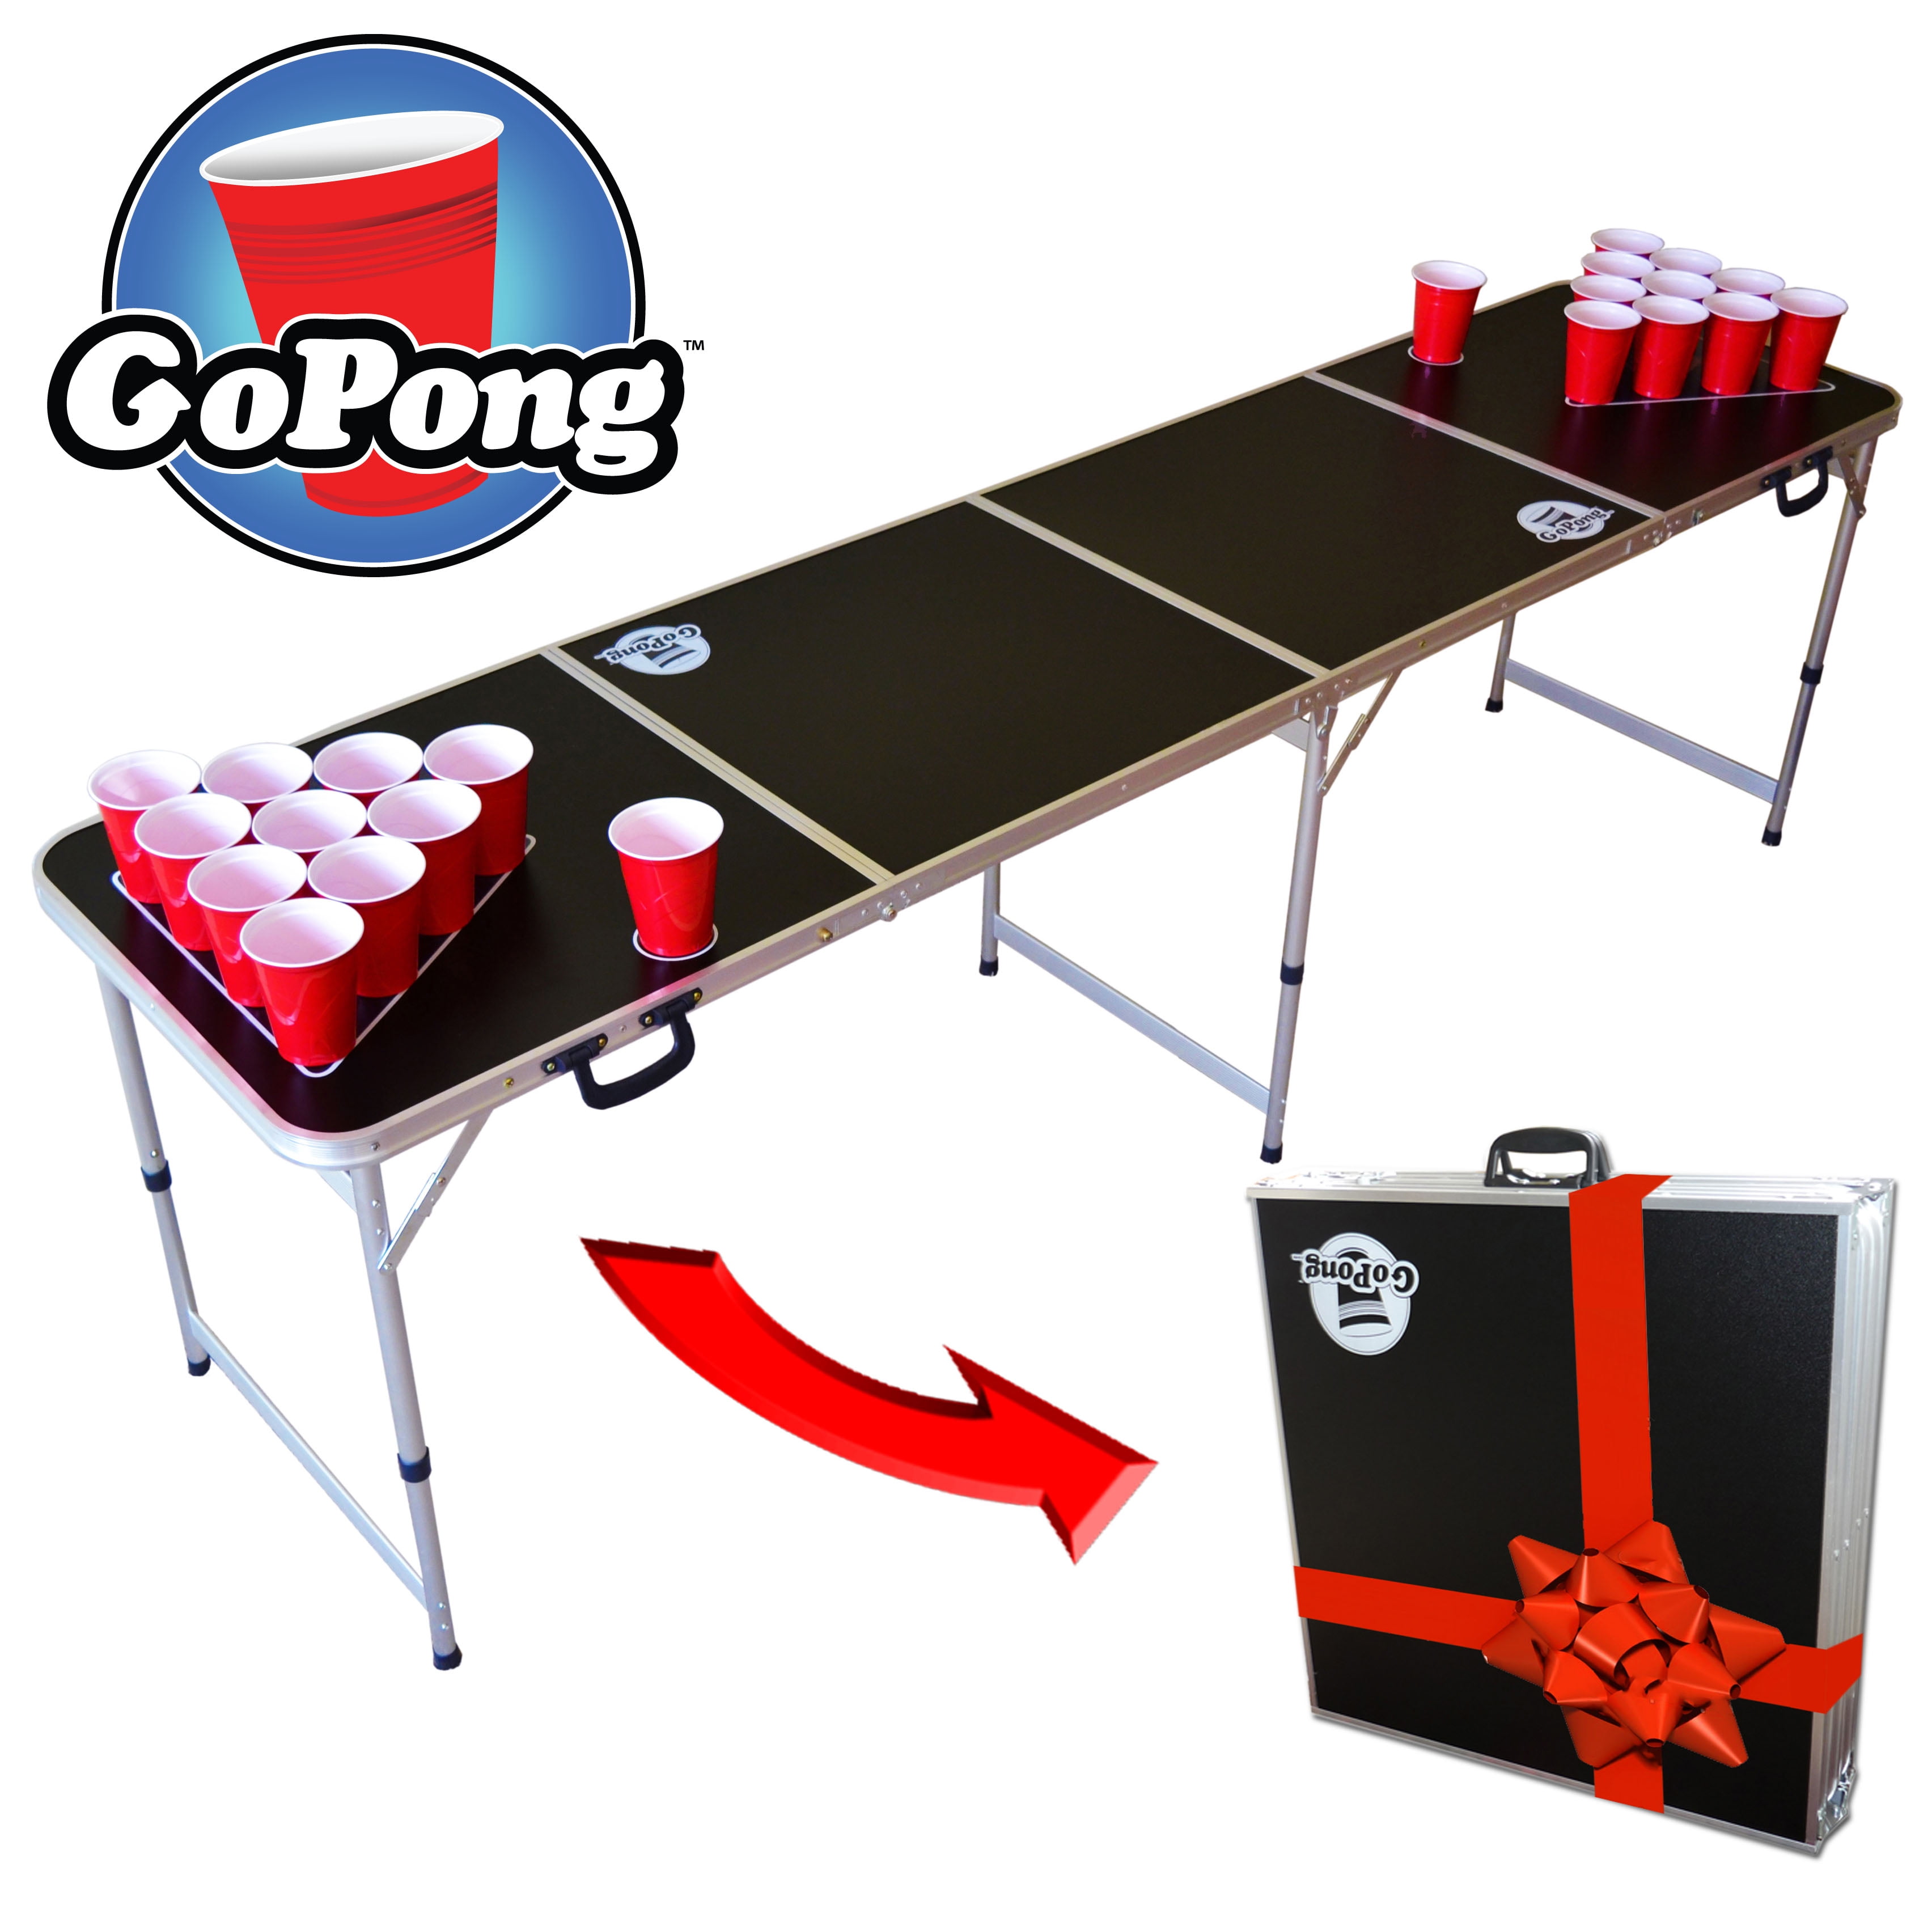 Lightweight Scratch Resistant Folding Beer Pong Table w/ Rack & 6 Ball Pong 6ft 